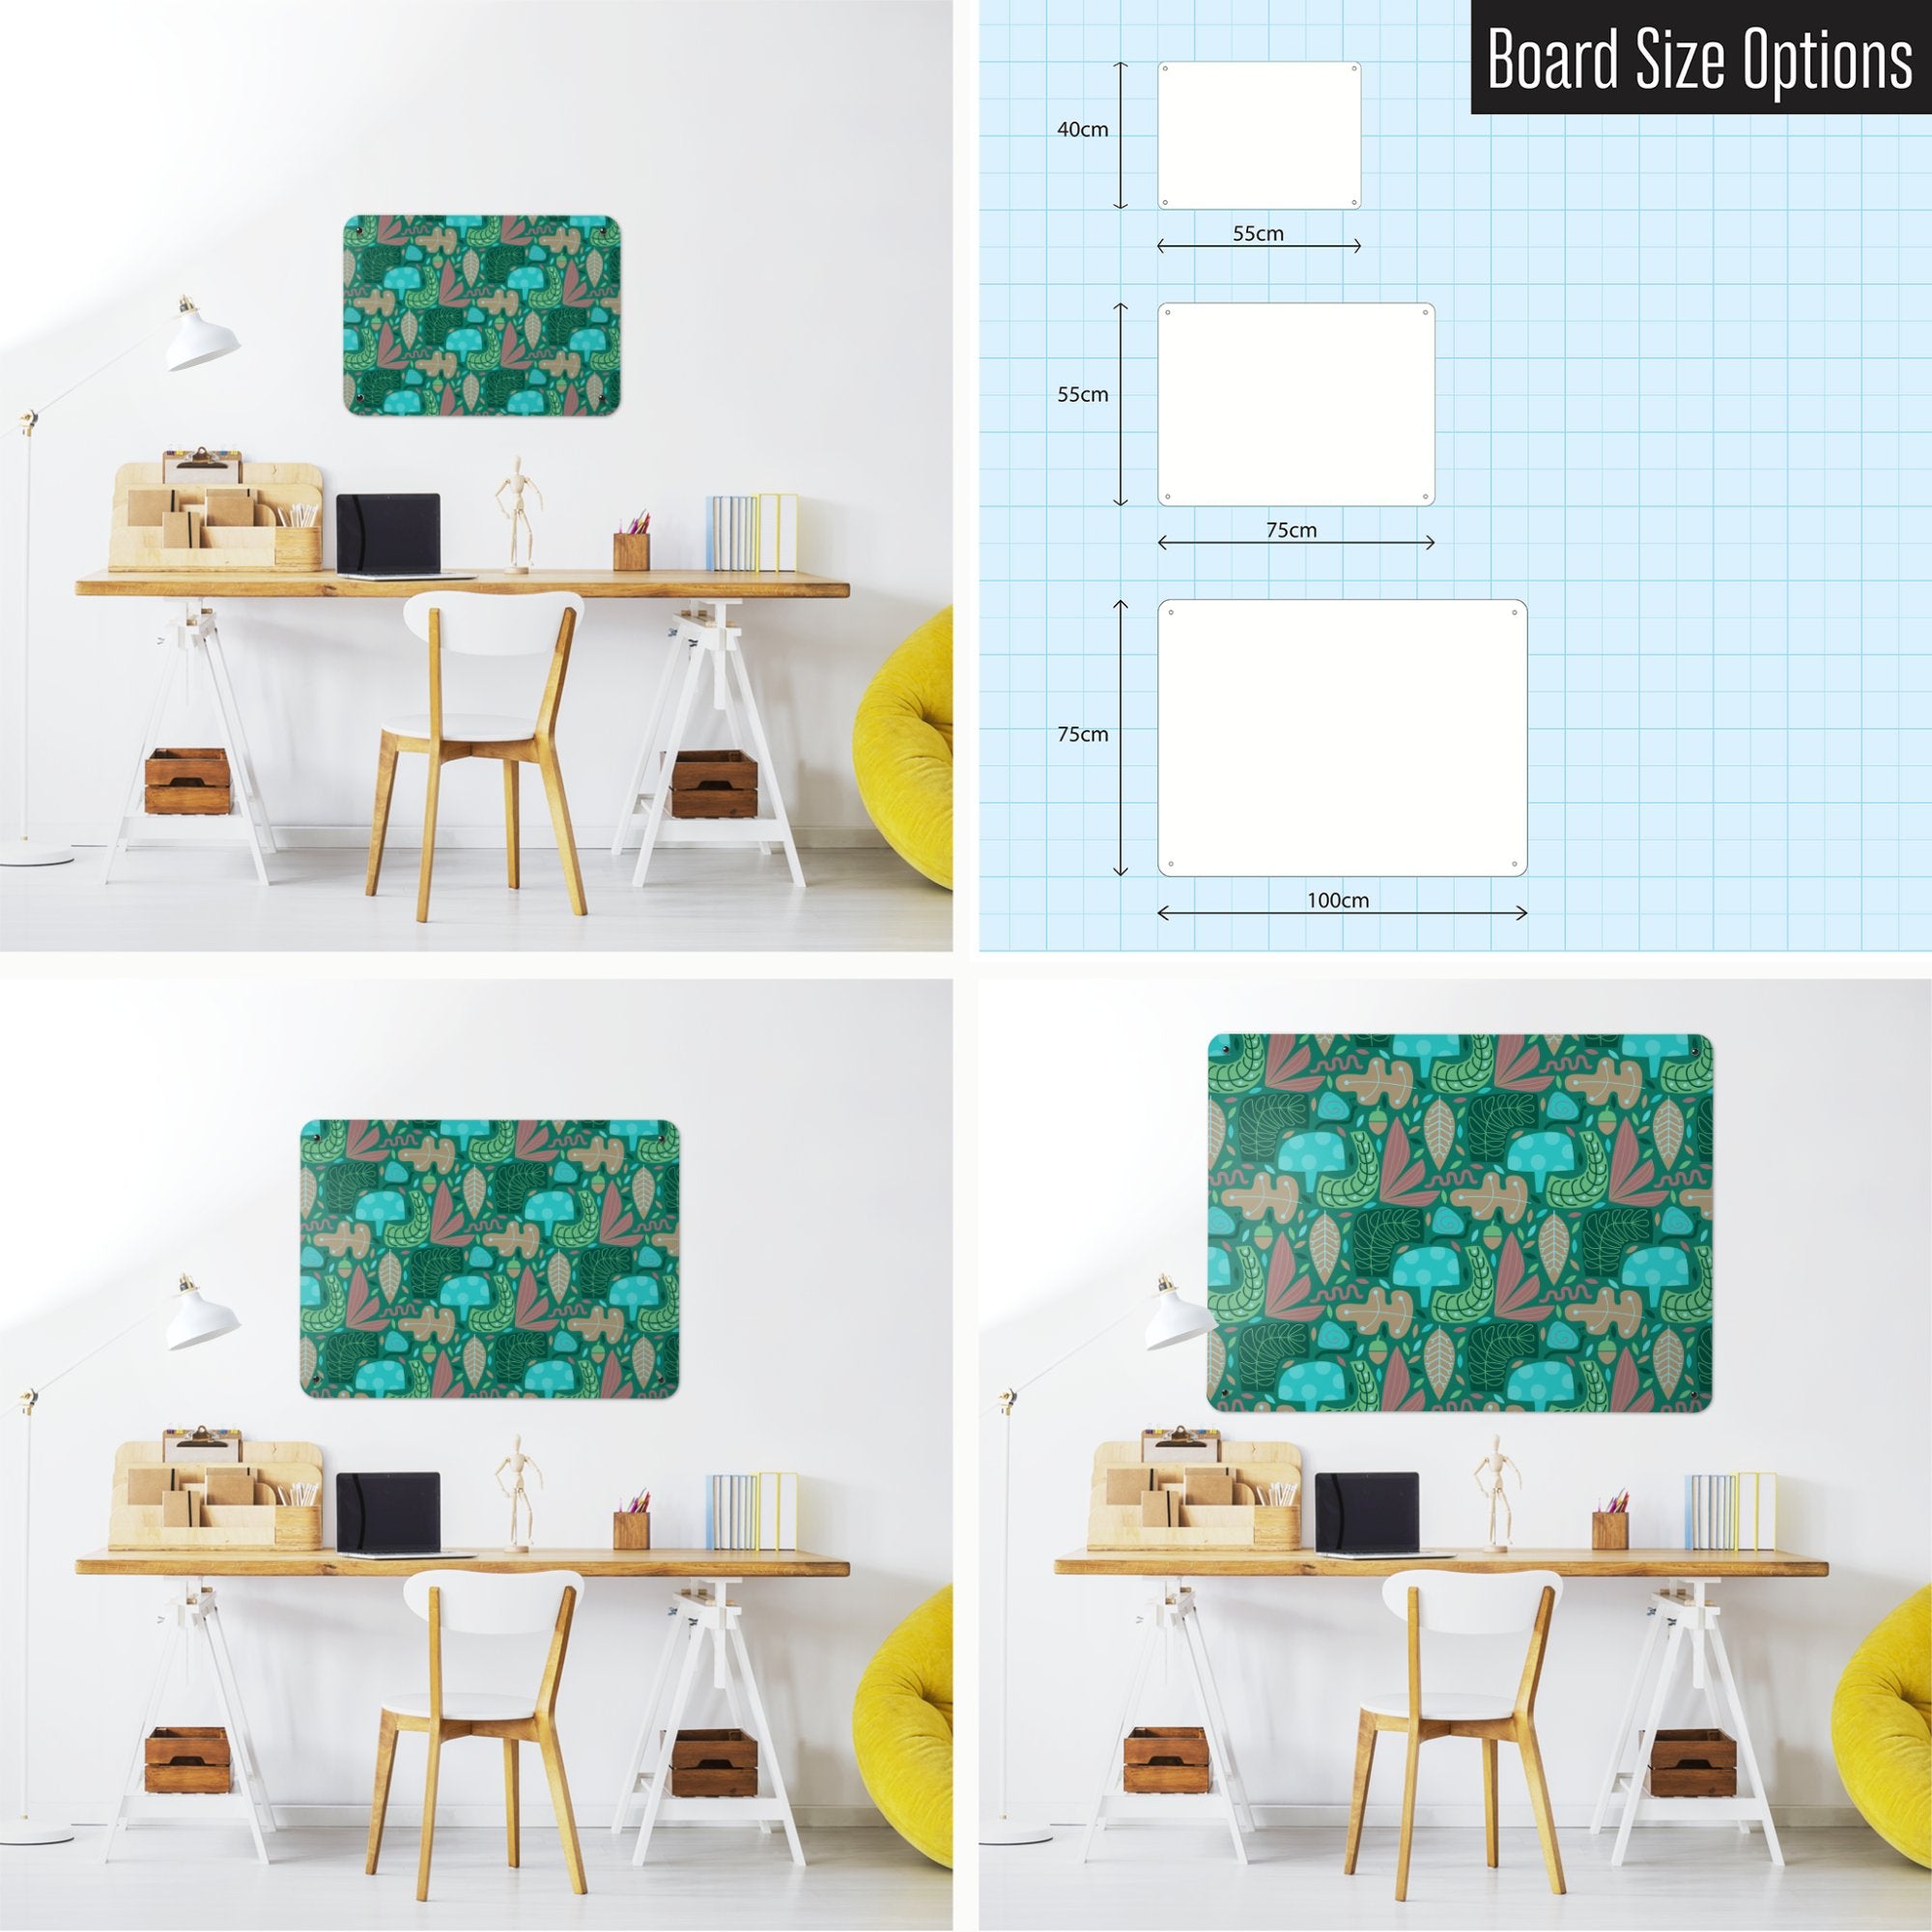 Three photographs of a workspace interior and a diagram to show size comparisons of a forest floor design magnetic notice board